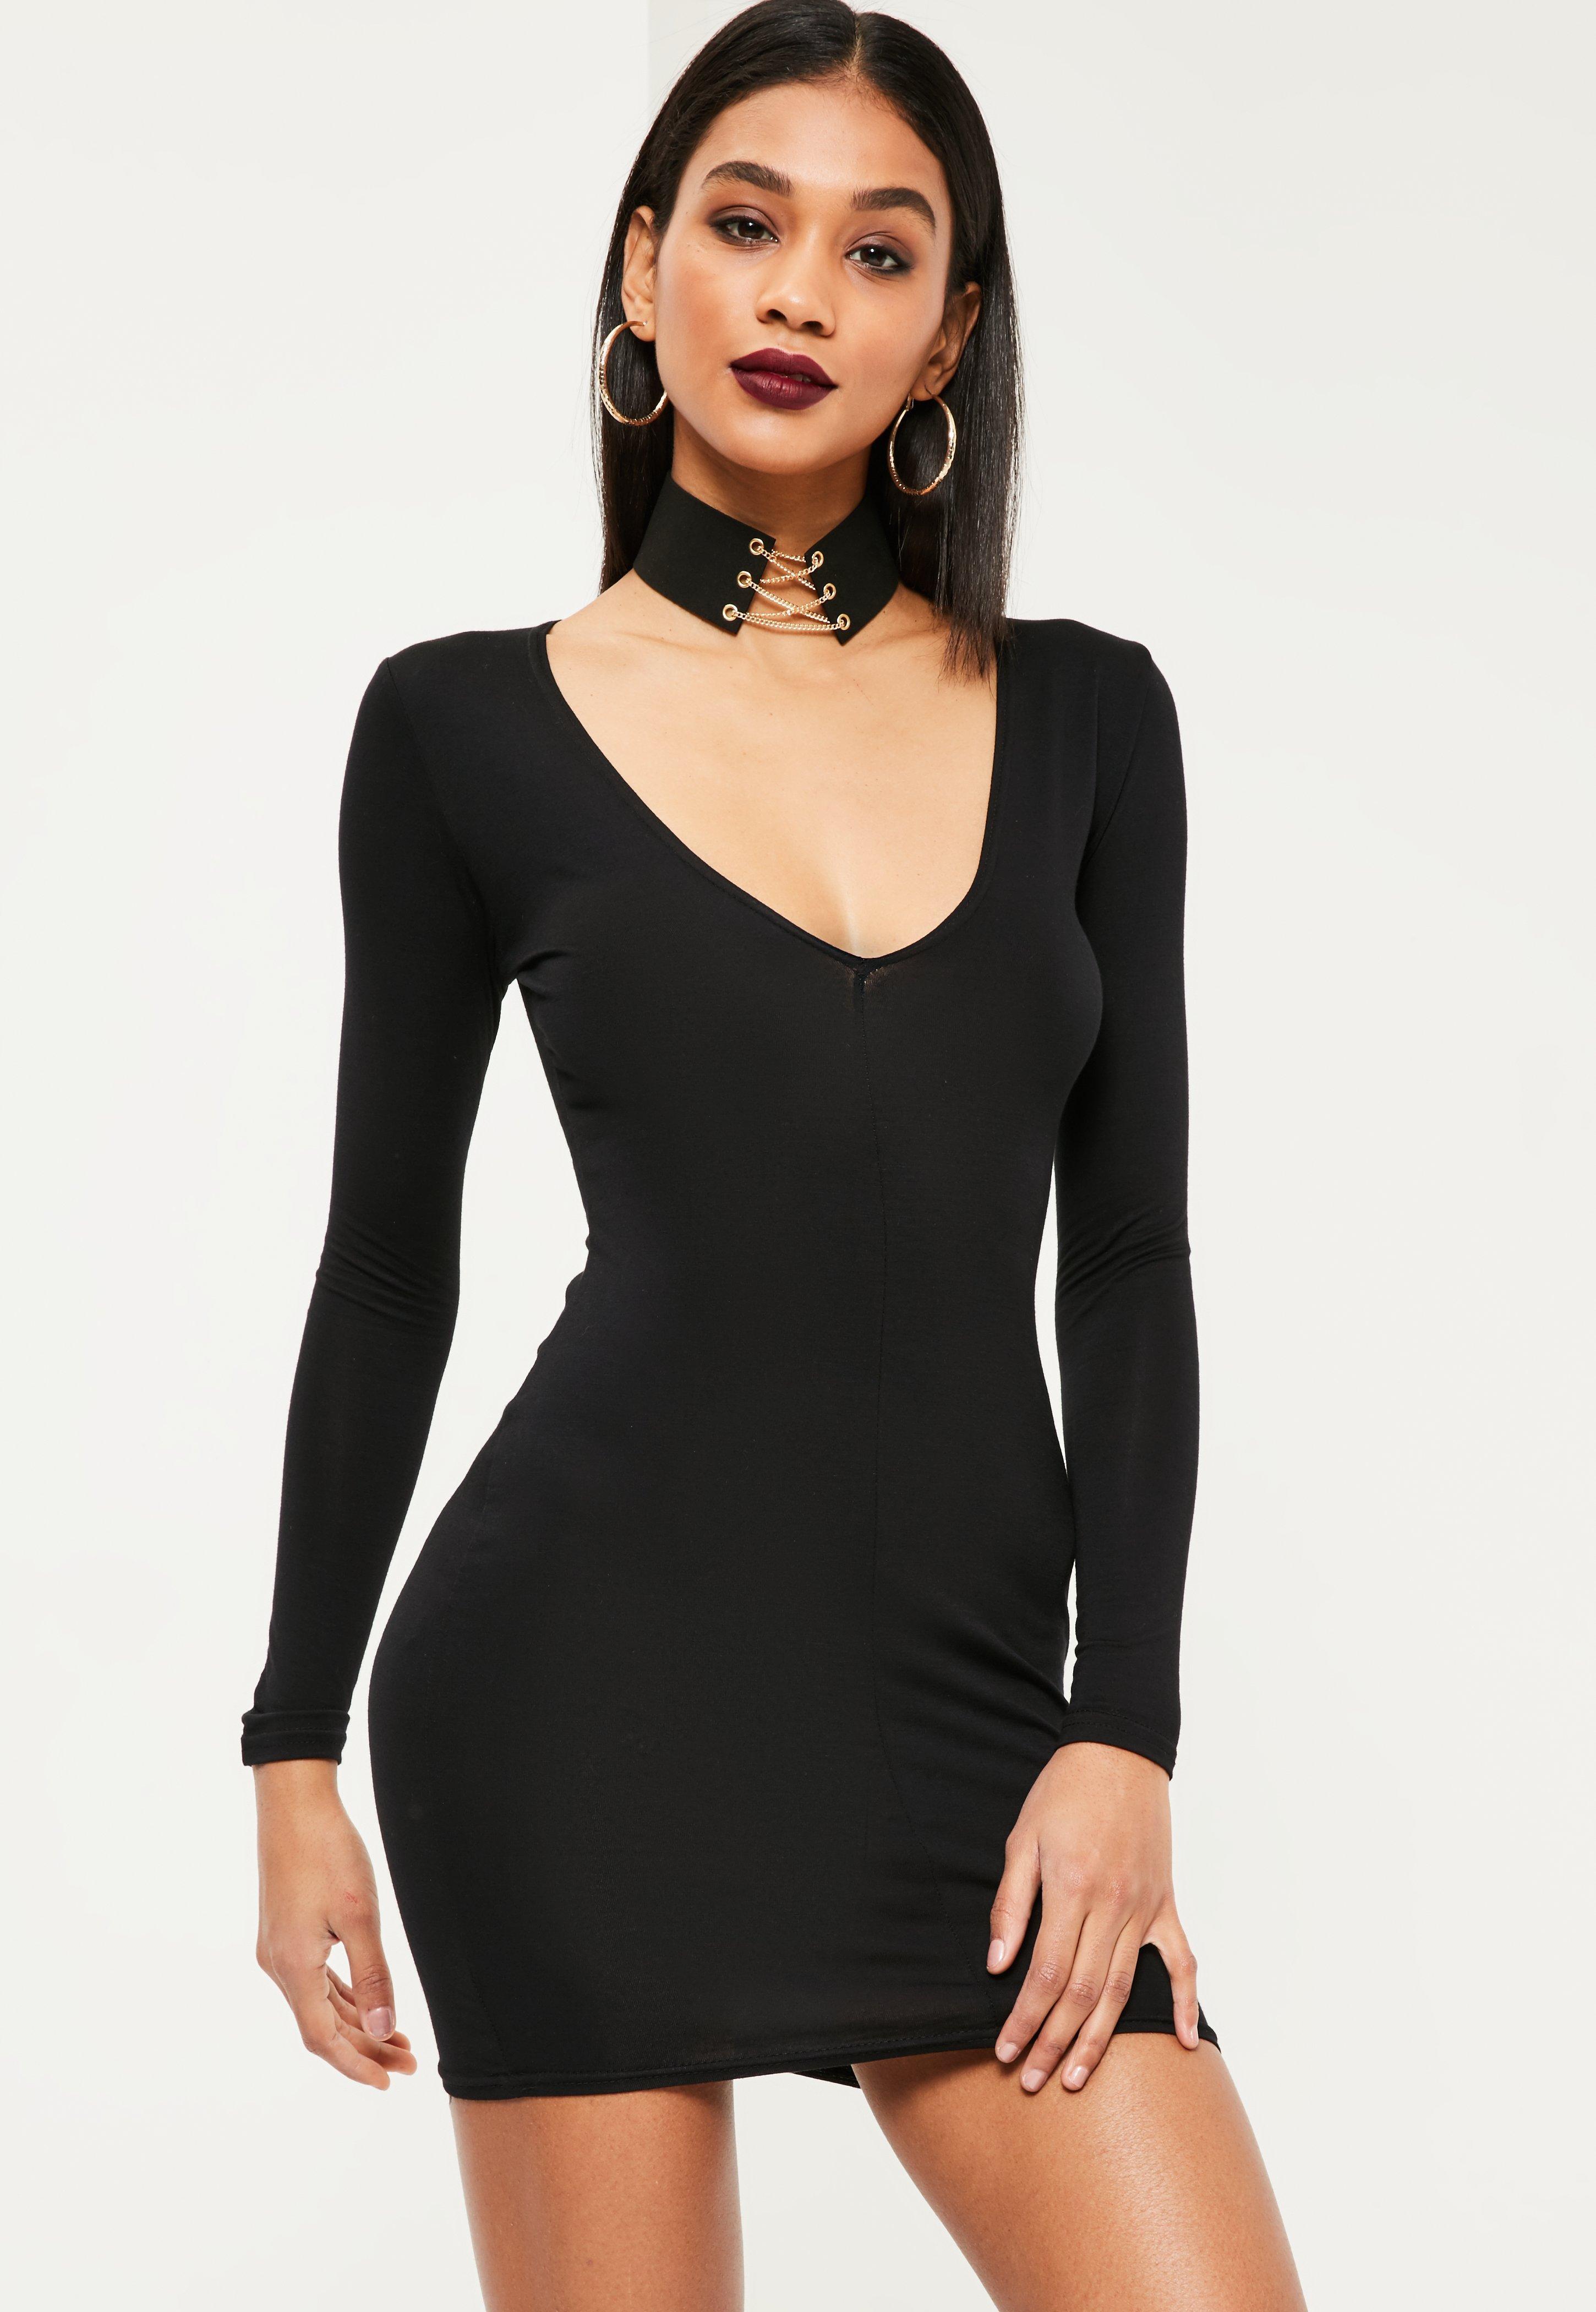 Bodycon Dresses: Fitted, Tight & More | Women | Forever 21 - European ...